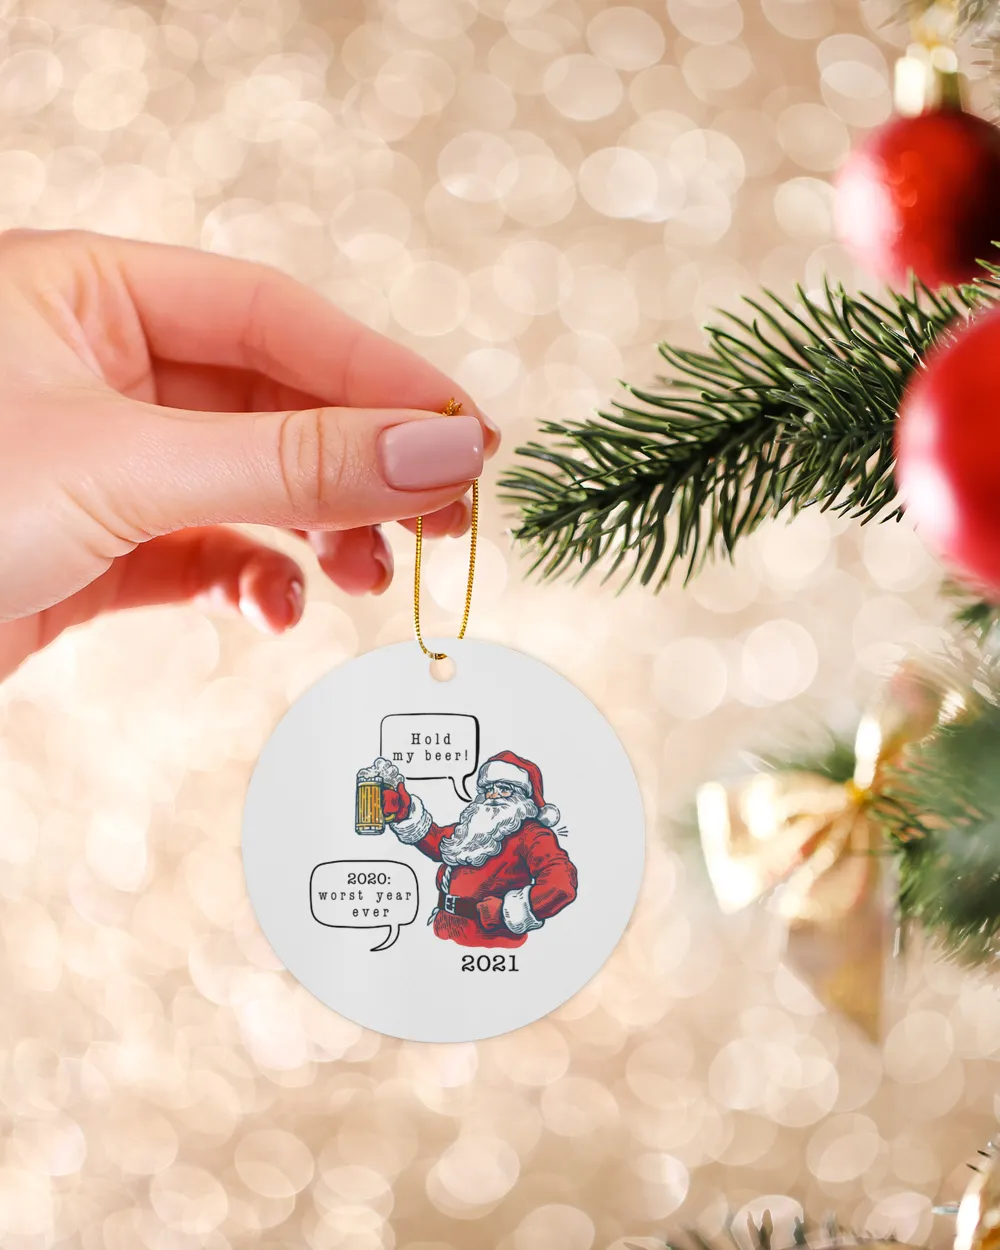 Hold My Beer 2021 Ornament